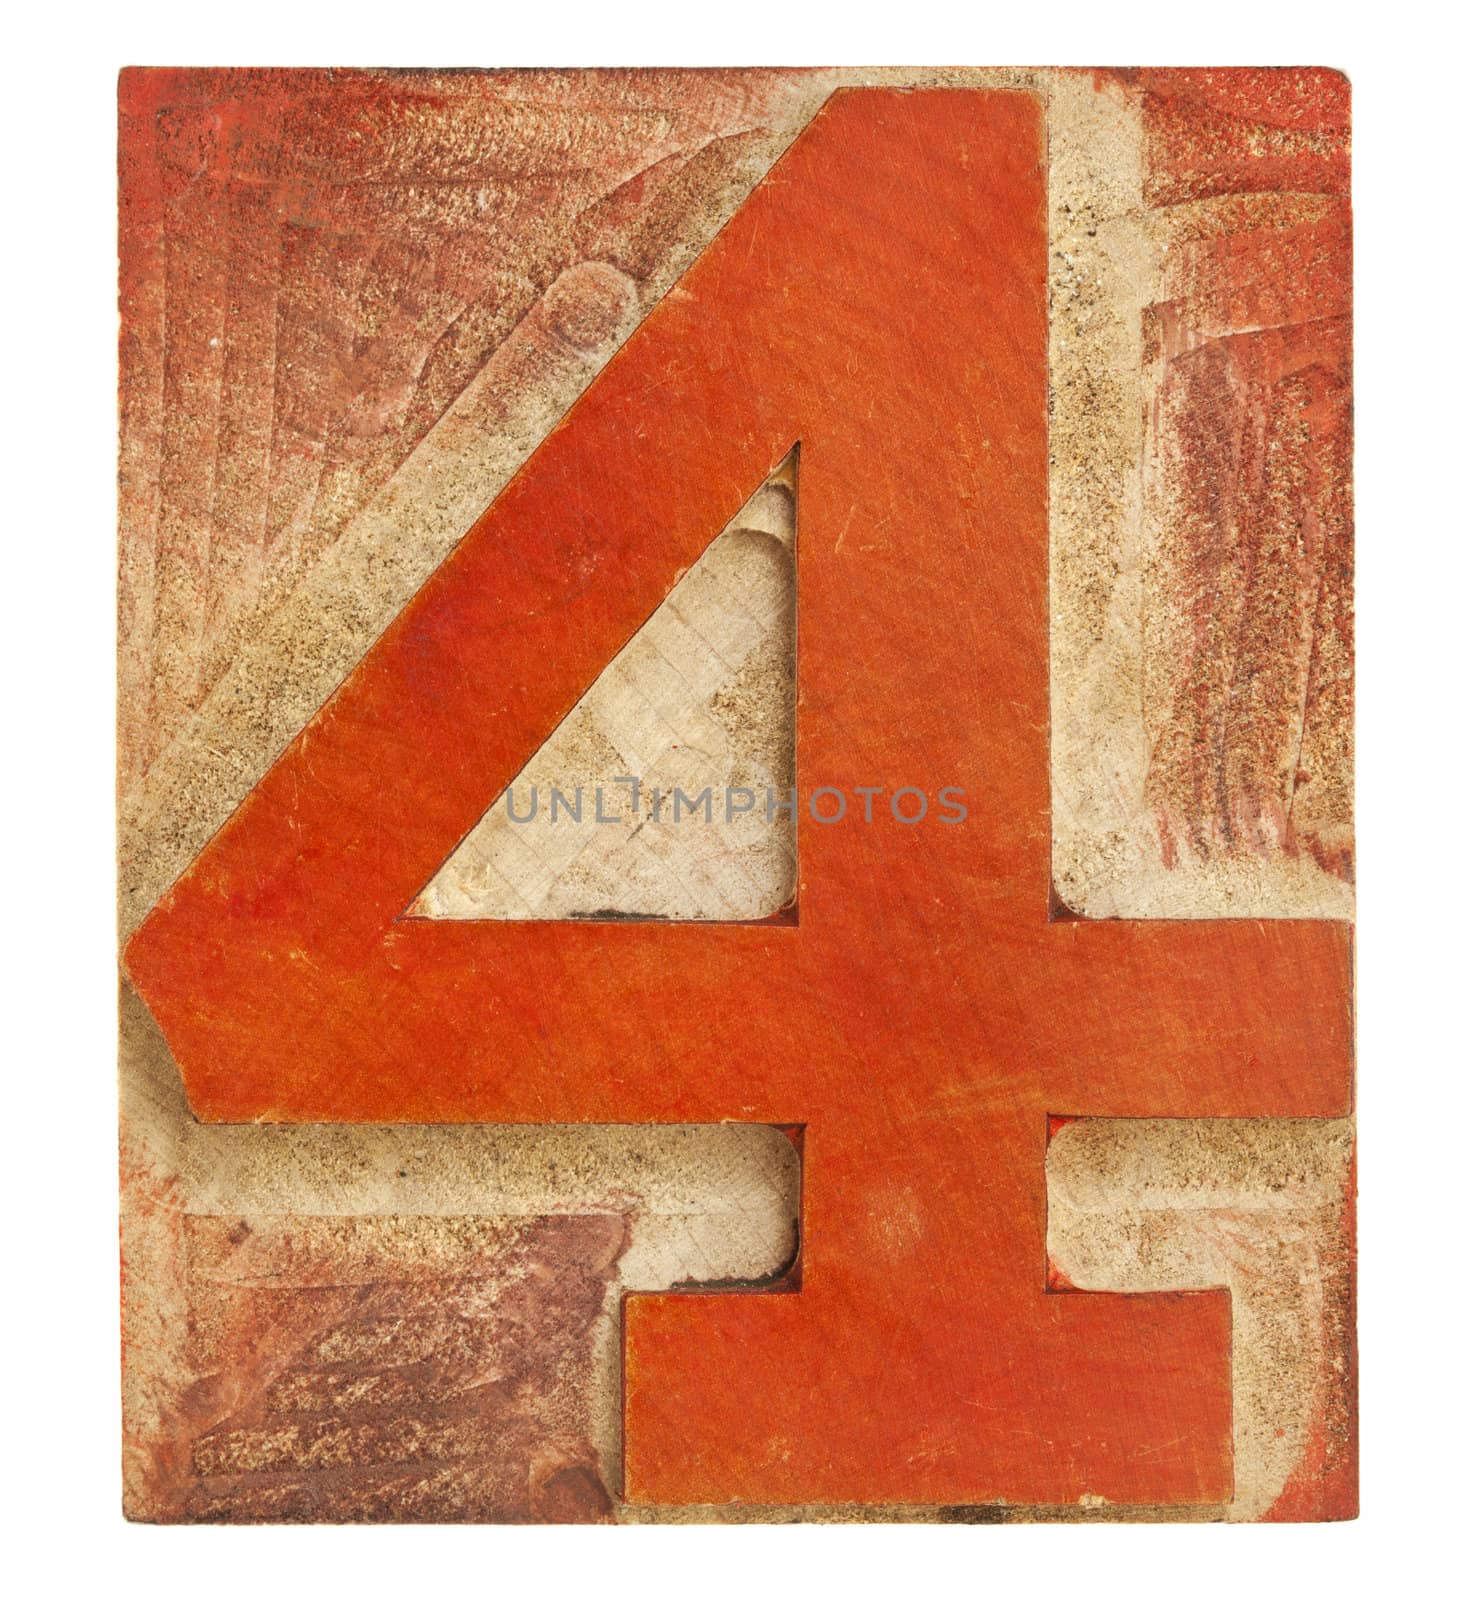 number four - isolated letterpress printing block stained by red ink